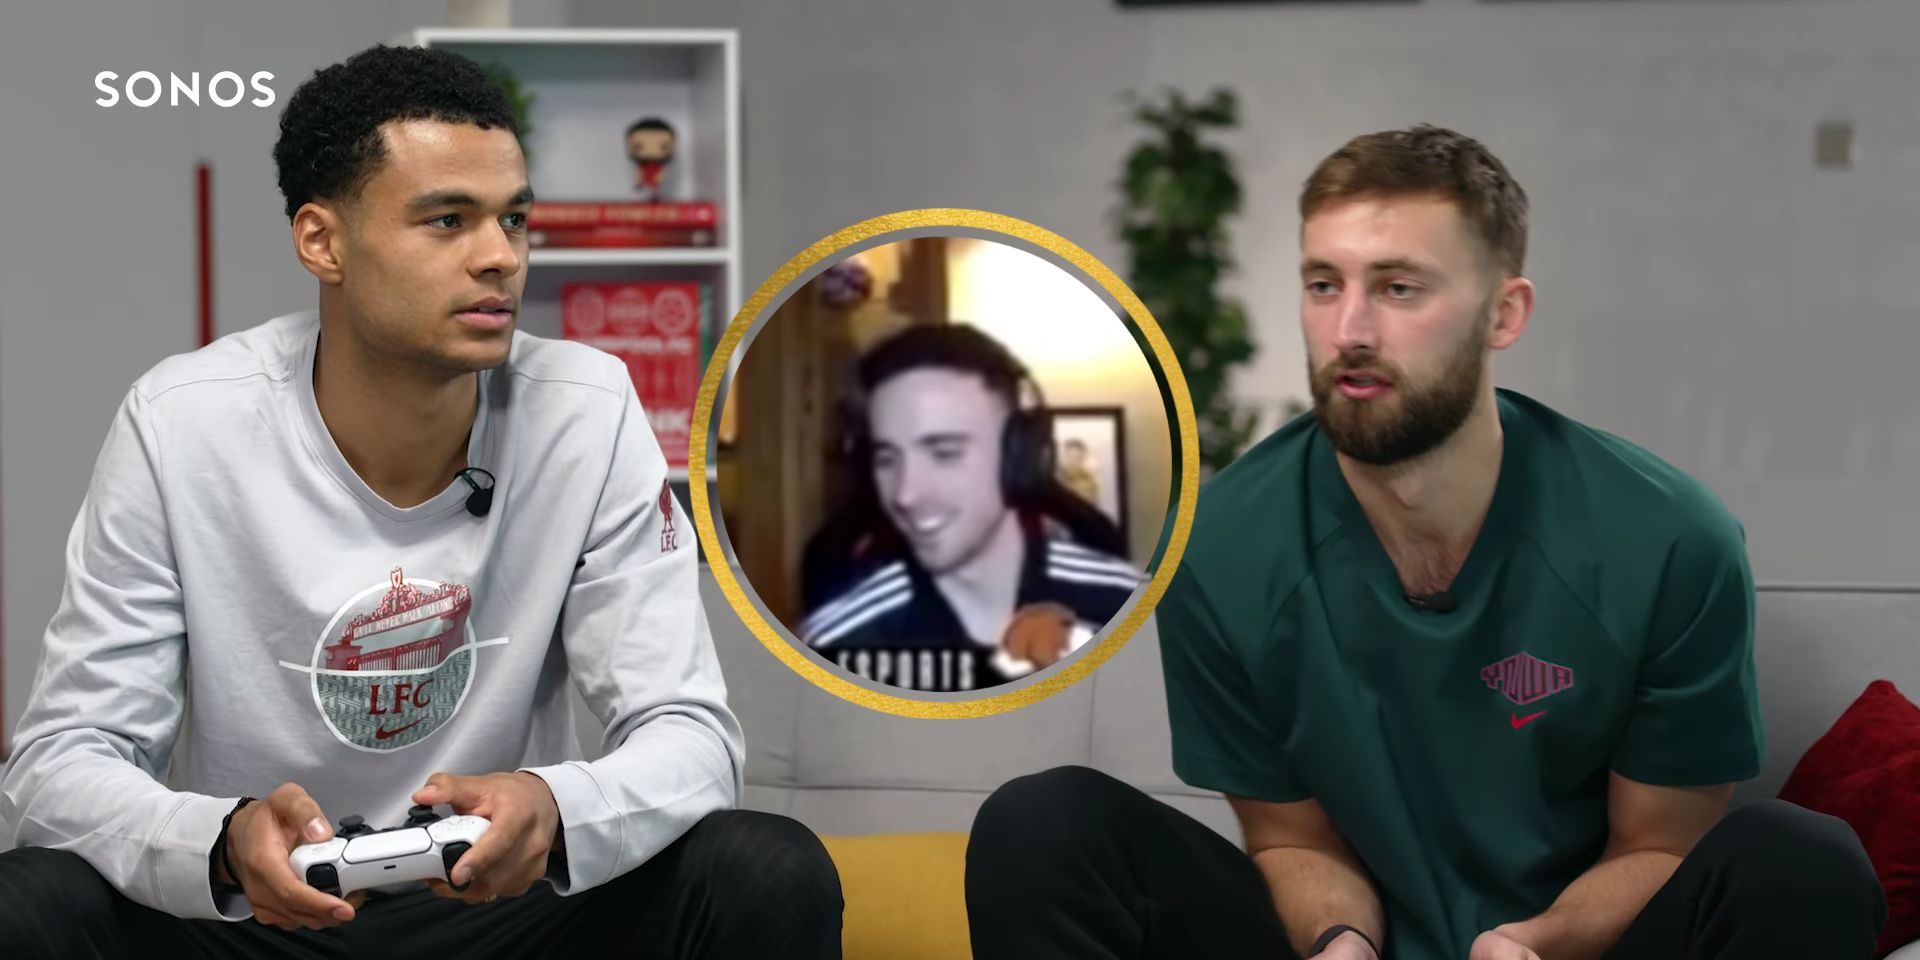 (Video) “I was expecting big things” – Gakpo and Phillips mock Jota’s FIFA skills